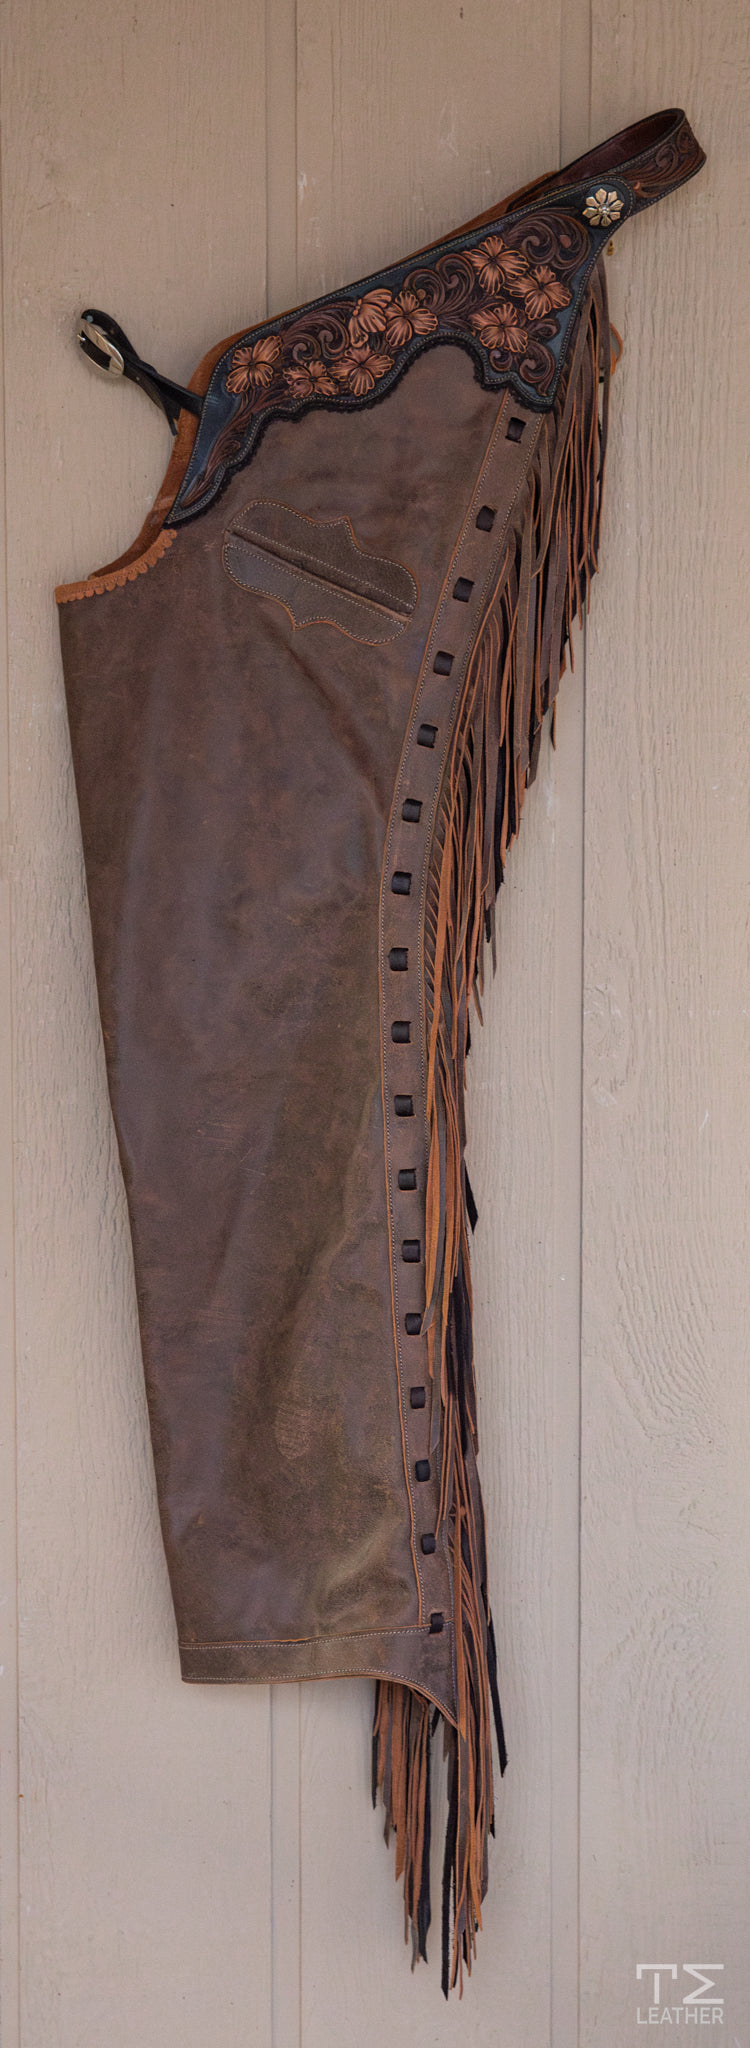 Distressed Brown Smooth-out Chaps w/ Black, Lt. Brown, & Walnut Floral Yokes w/ Pocket